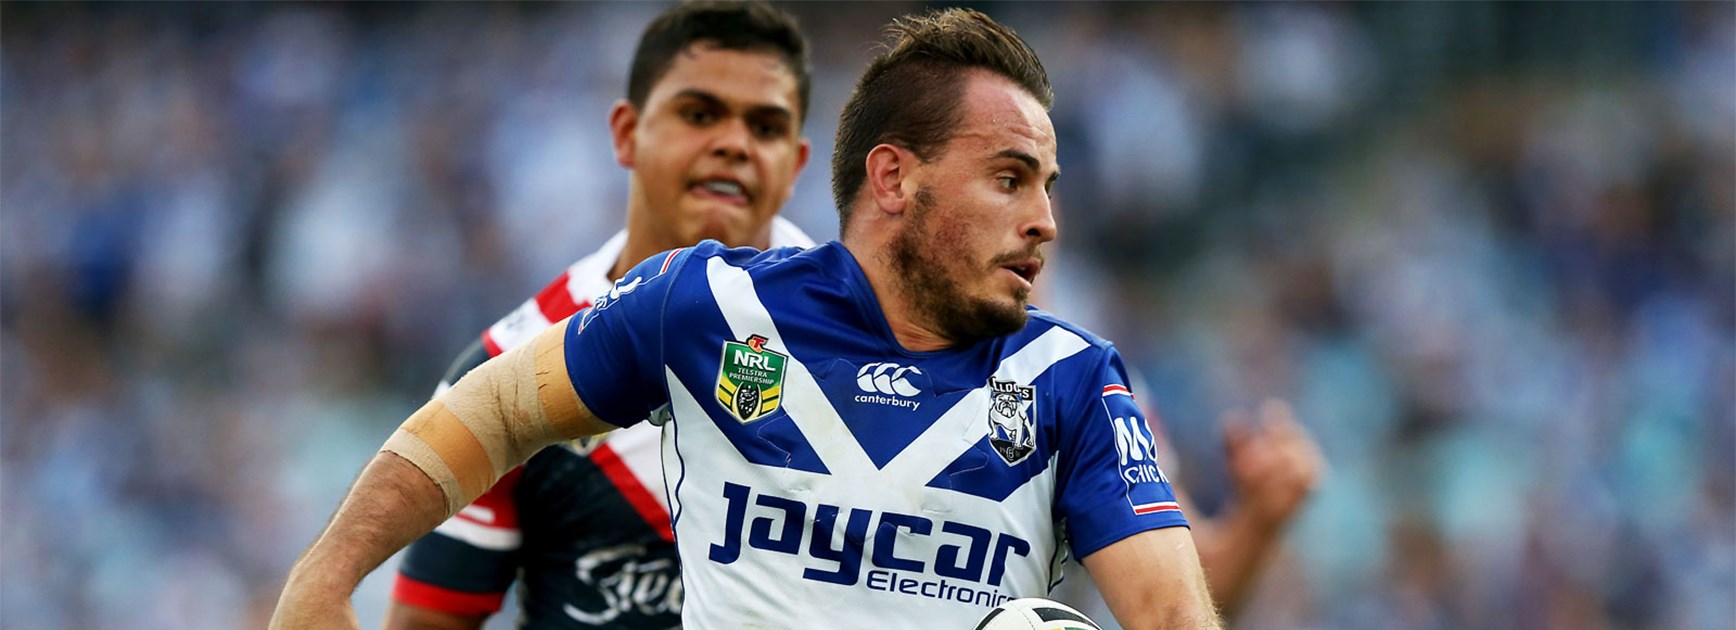 Josh Reynolds scored a sensational solo try against the Roosters on Sunday.